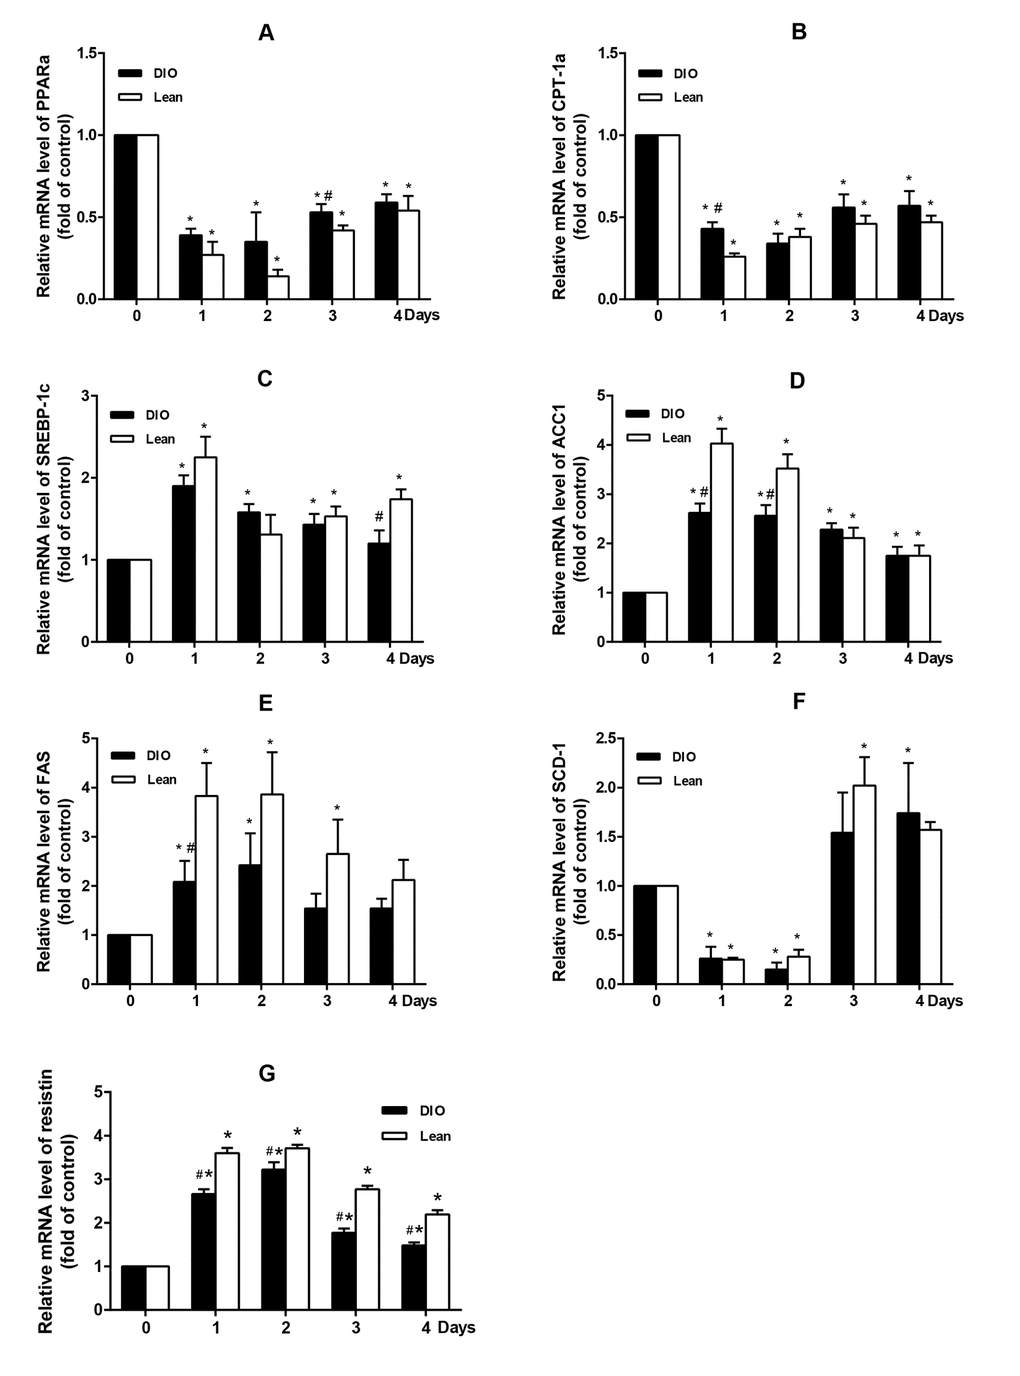 Effect of E. coli infection on the mRNA expression of hepatic lipid metabolism related genes in the lean and DIO mice by qRT-PCR. (A) PPARα, (B) CPT-1α, (C) SREBP-1c, (D) ACC1, (E) FAS, (F) SCD-1 and (G) Resisin. Values are displayed as mean ± SD (n=6). “*”p